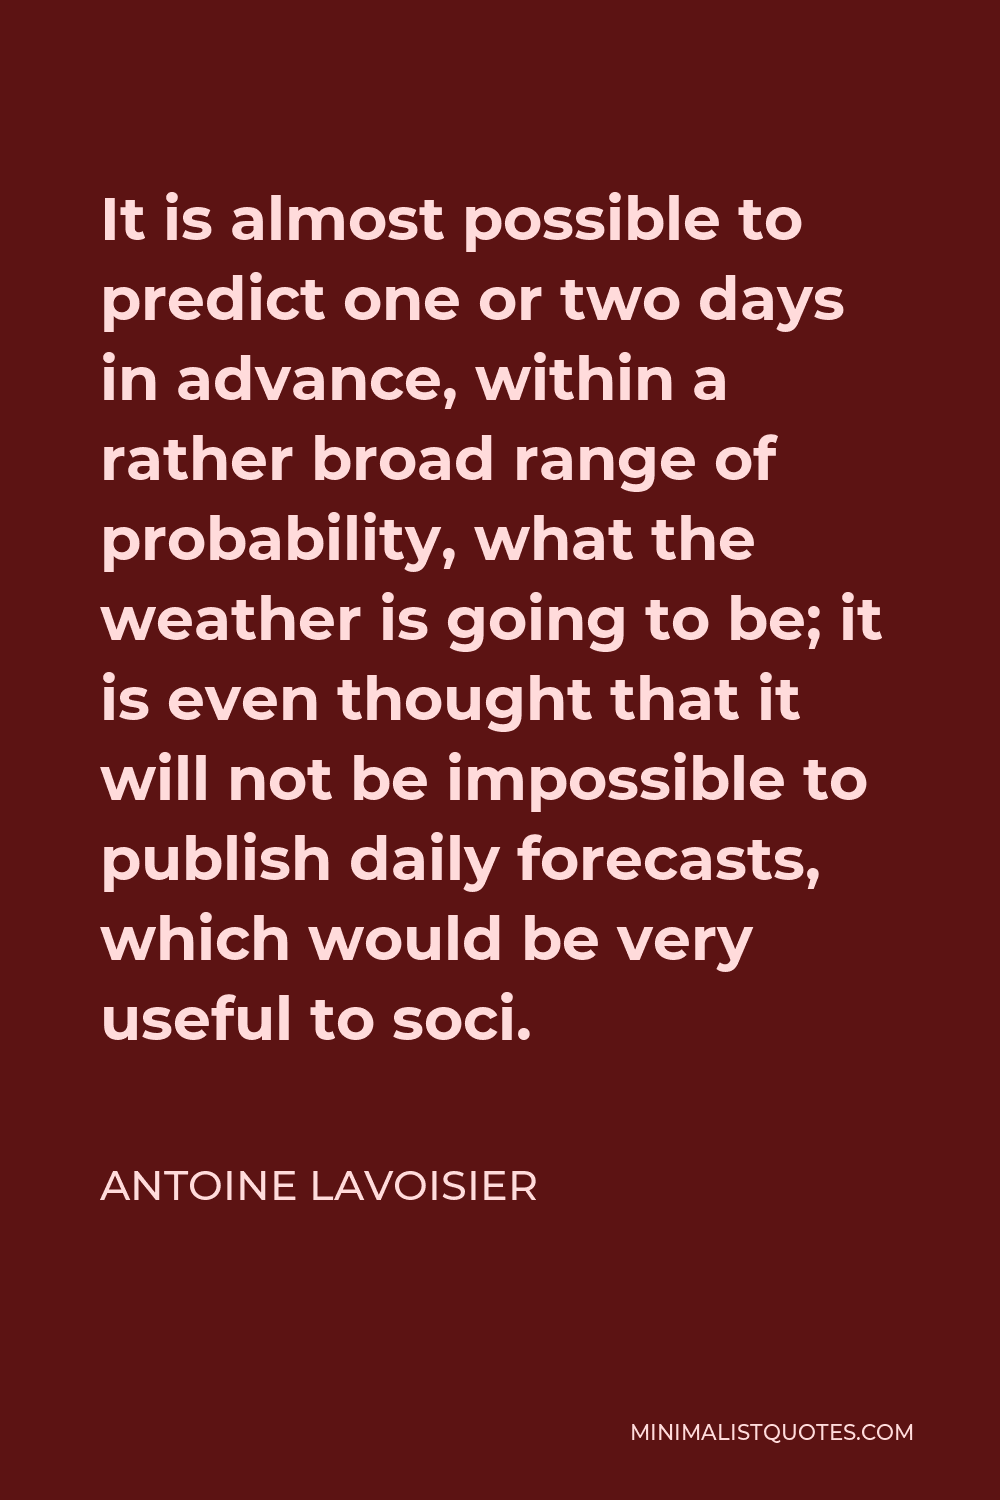 Antoine Lavoisier Quote - It is almost possible to predict one or two days in advance, within a rather broad range of probability, what the weather is going to be; it is even thought that it will not be impossible to publish daily forecasts, which would be very useful to soci.